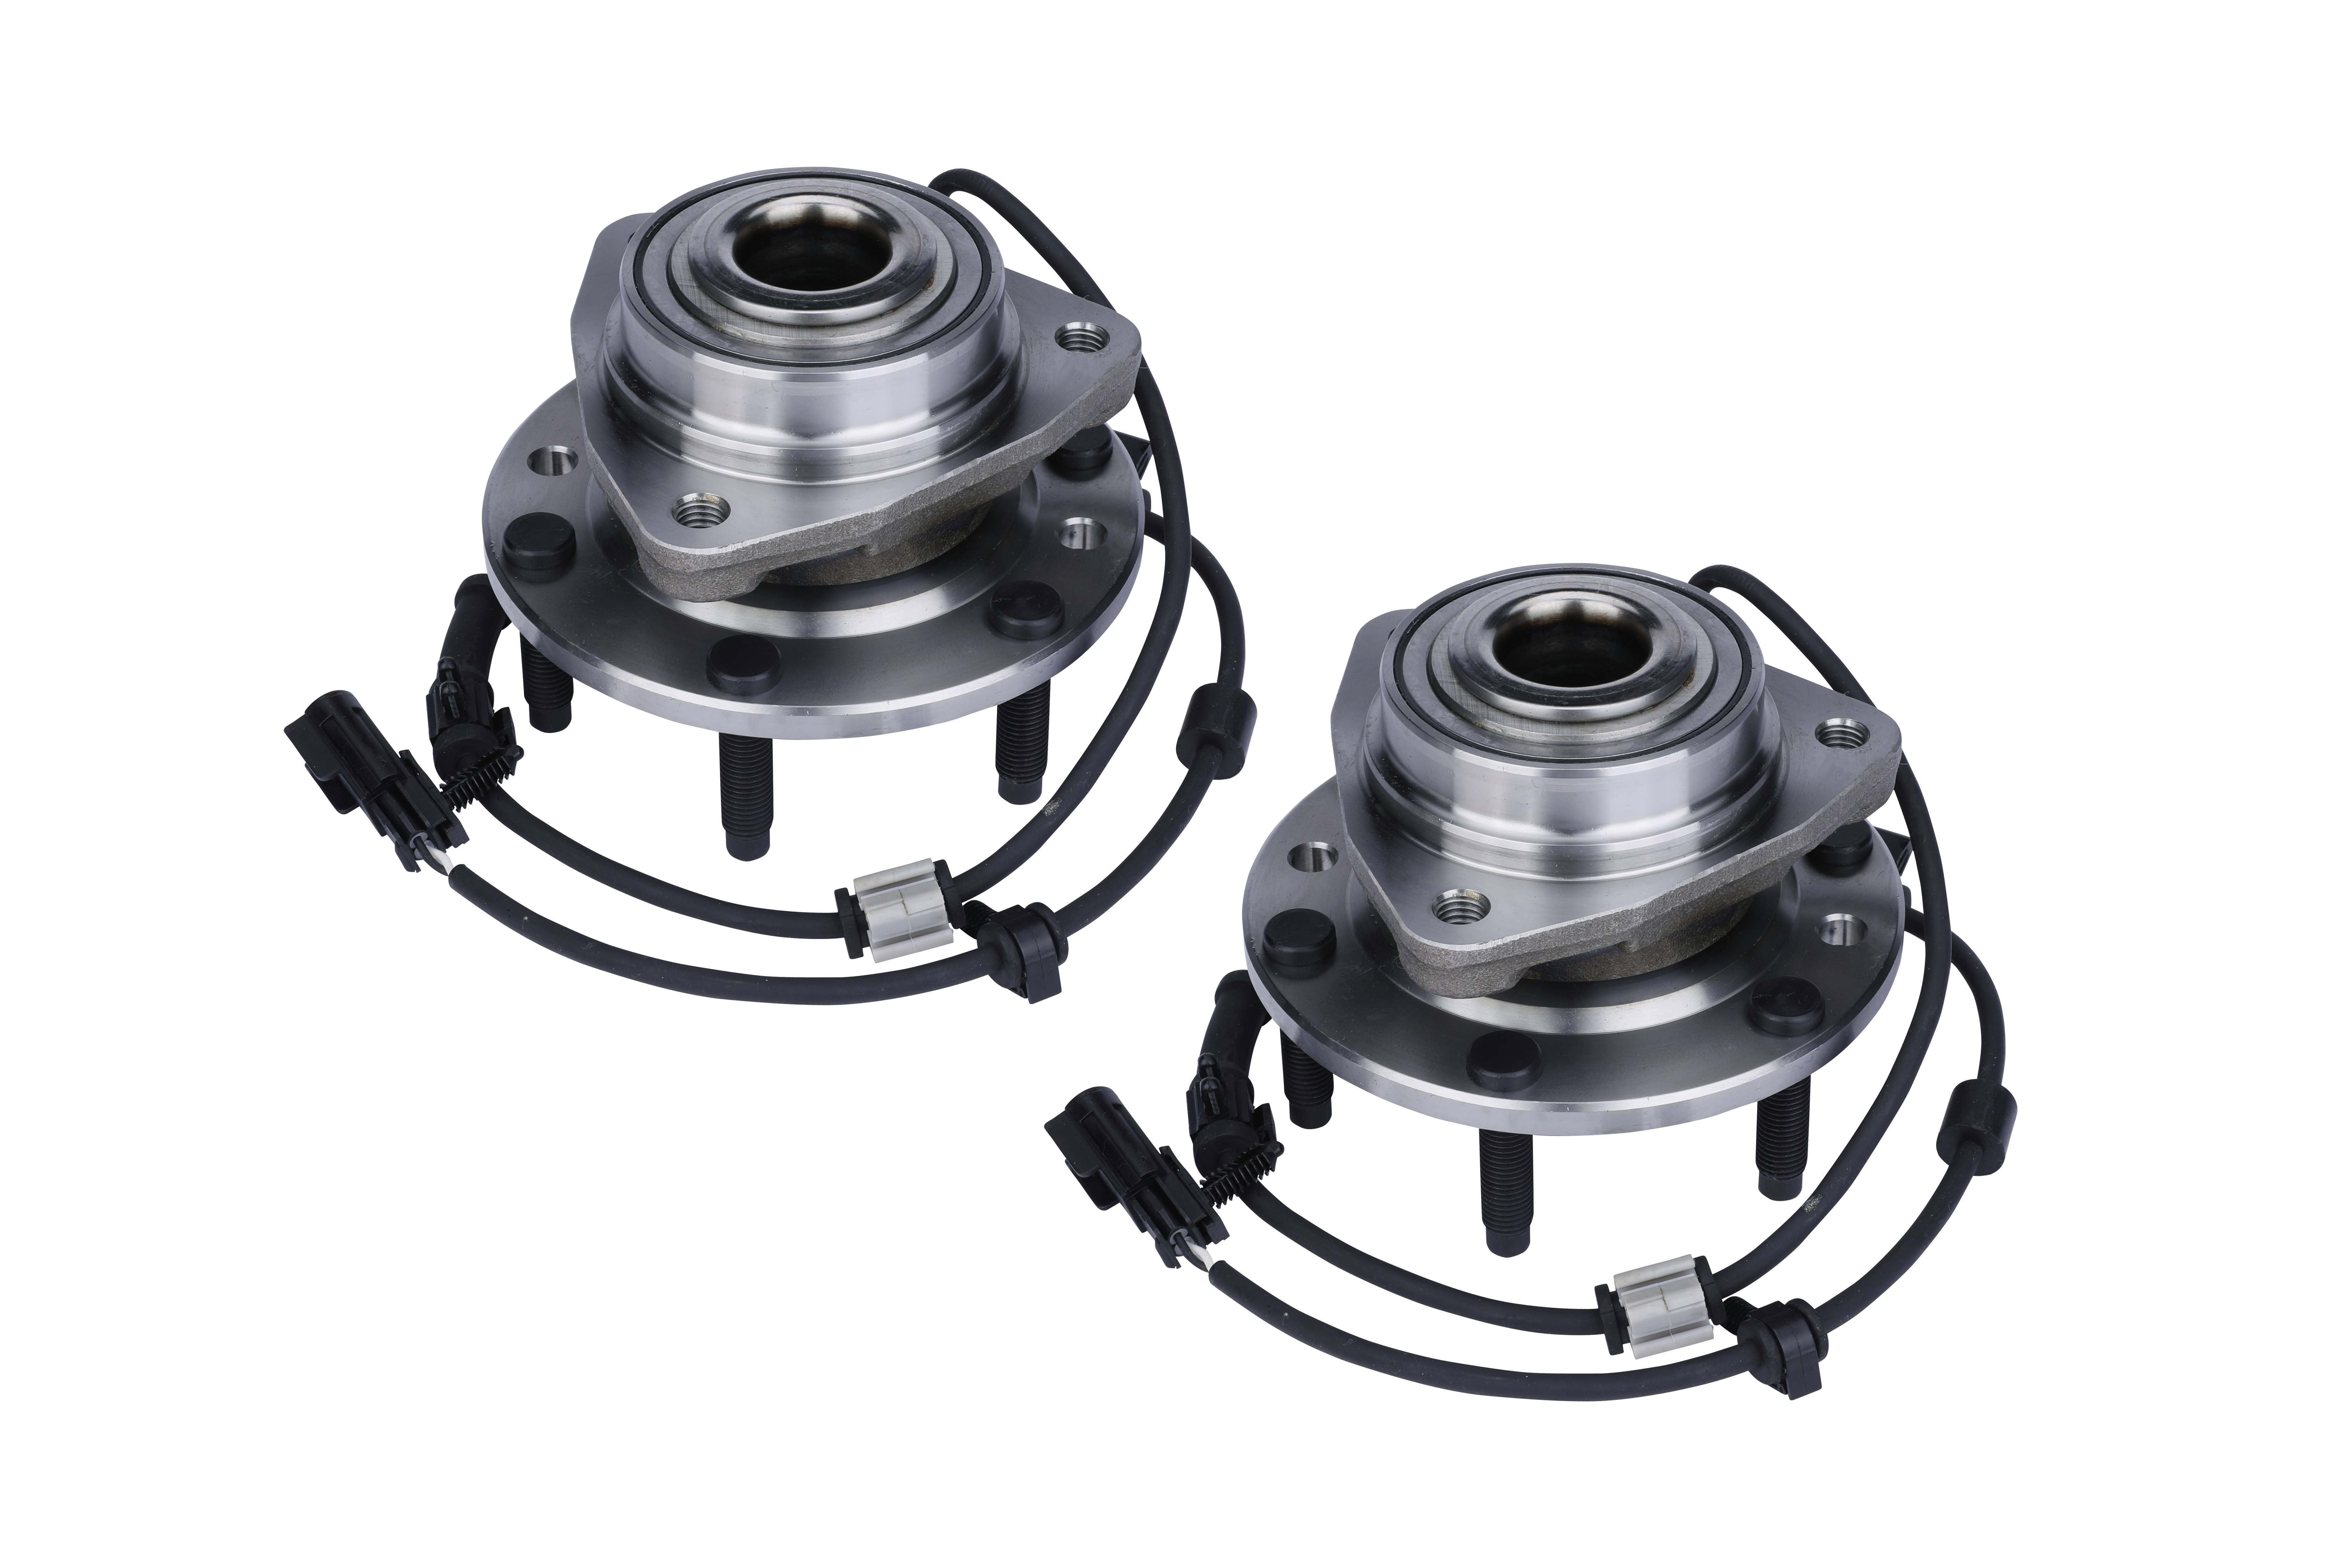 Front Wheel Hub Bearing Assembly Set of 2 - Replaces 12413037 for Chevy Buick & GMC Vehicles Image